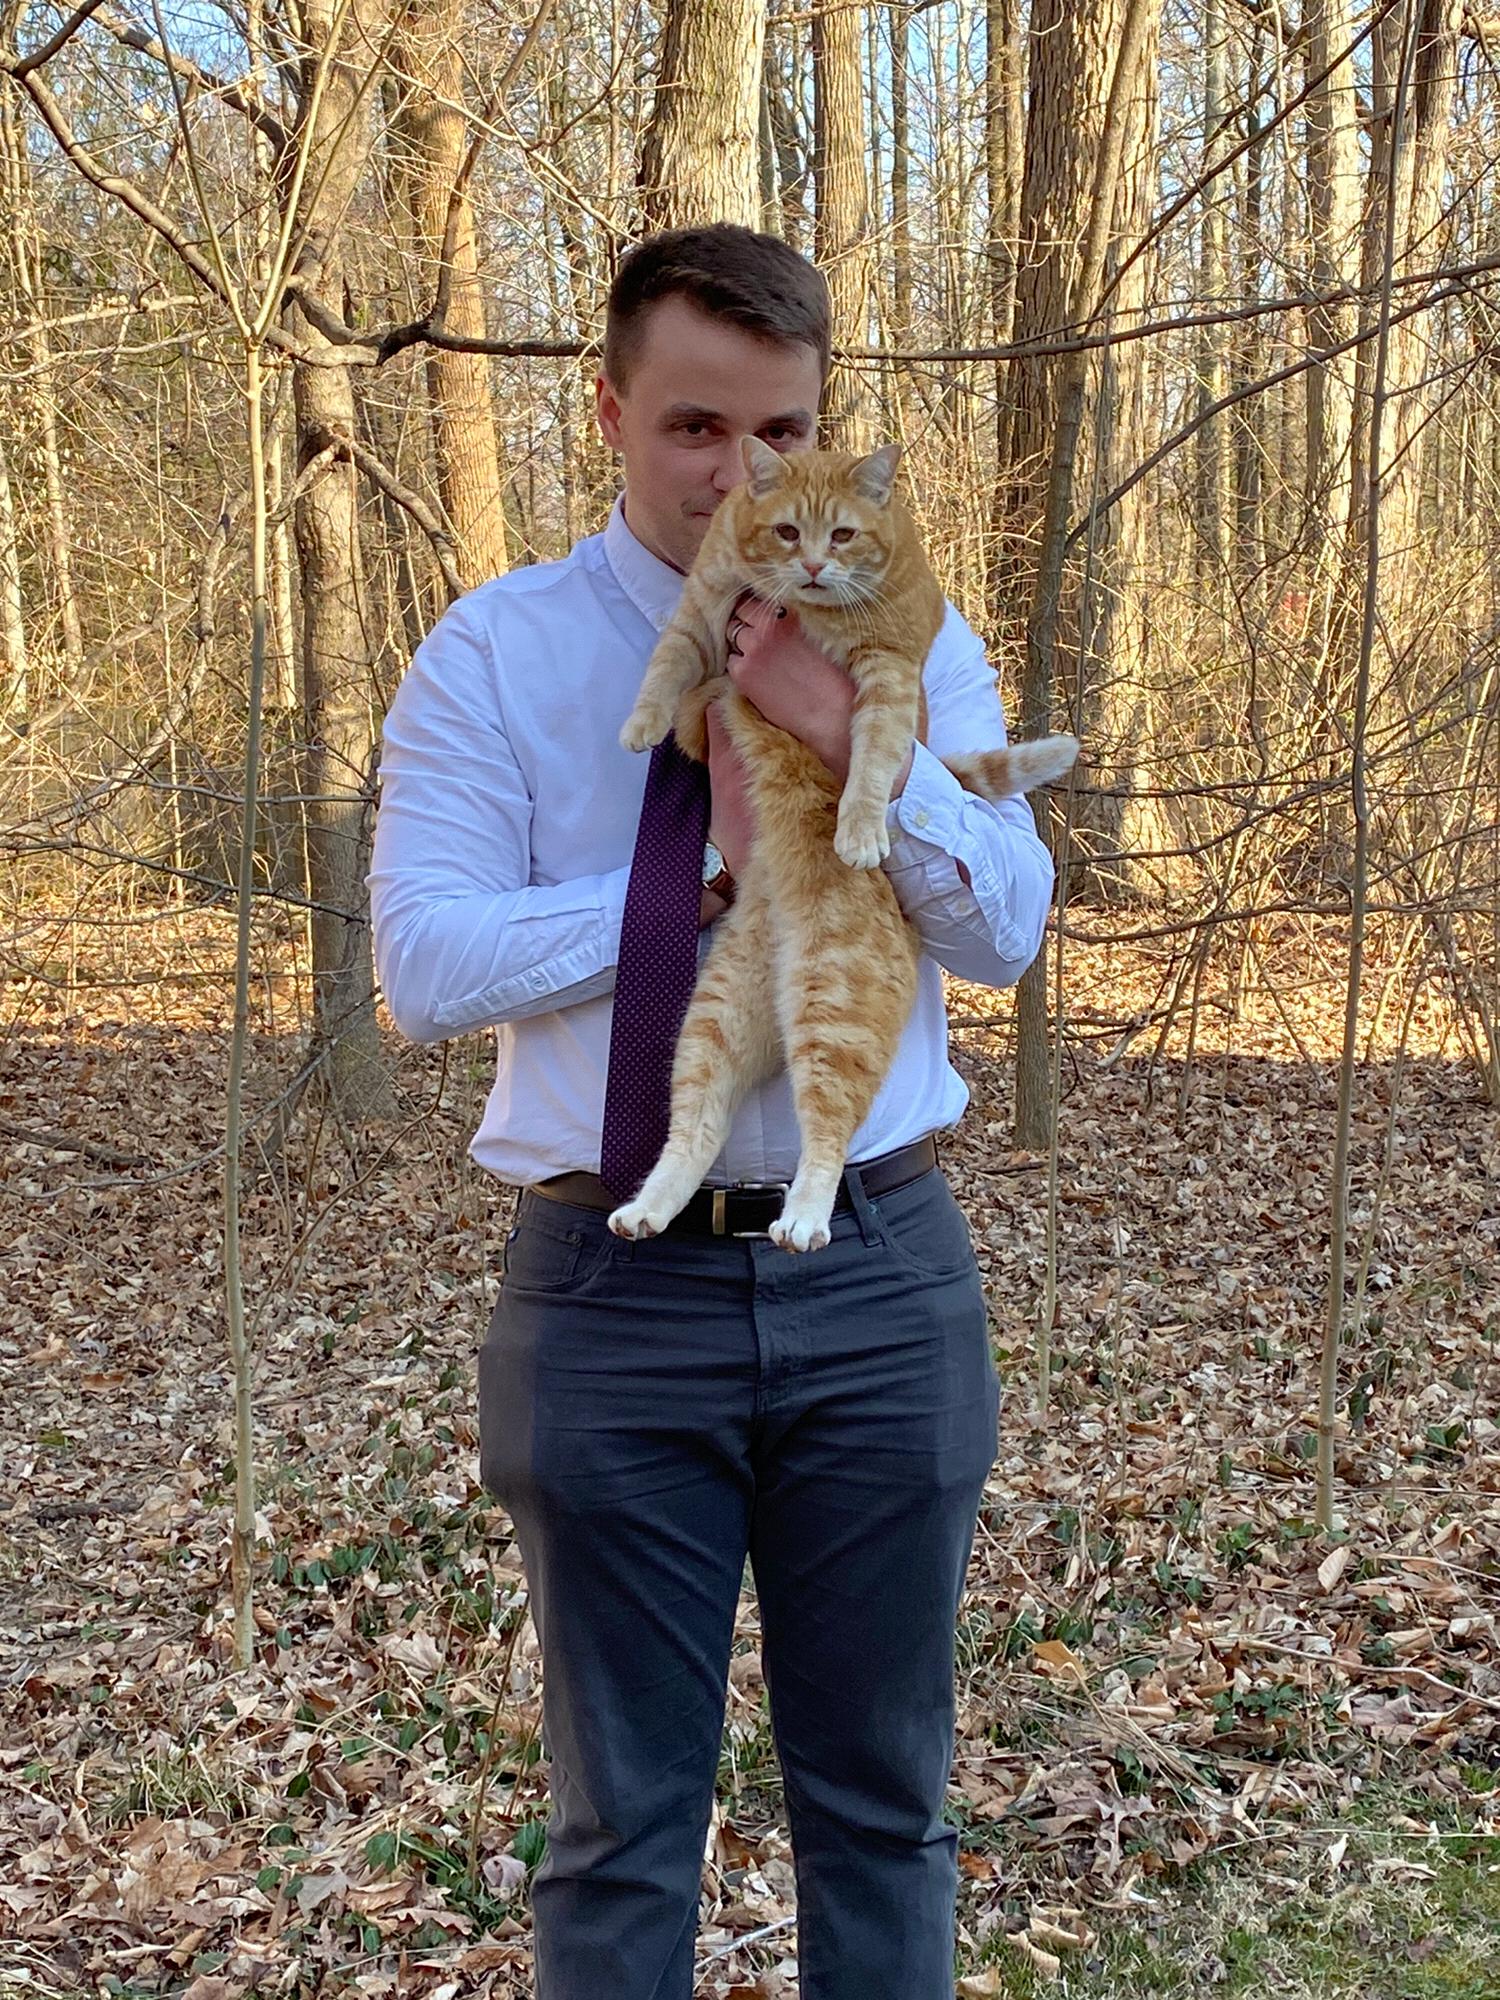 Jim with his real Best Man (sorry Michael), March 2020